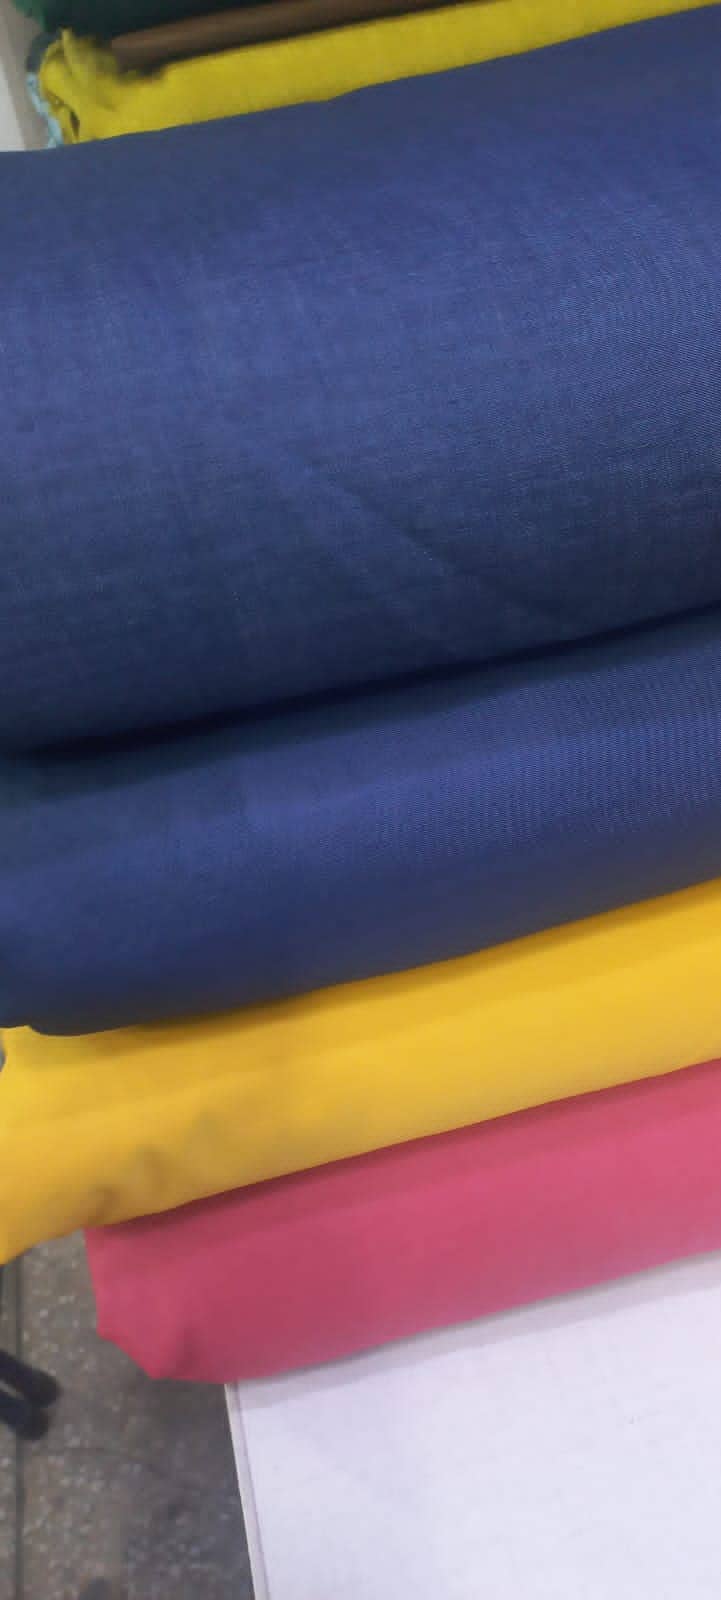 Denim Jeans Fabric Soft and Export Quality 4